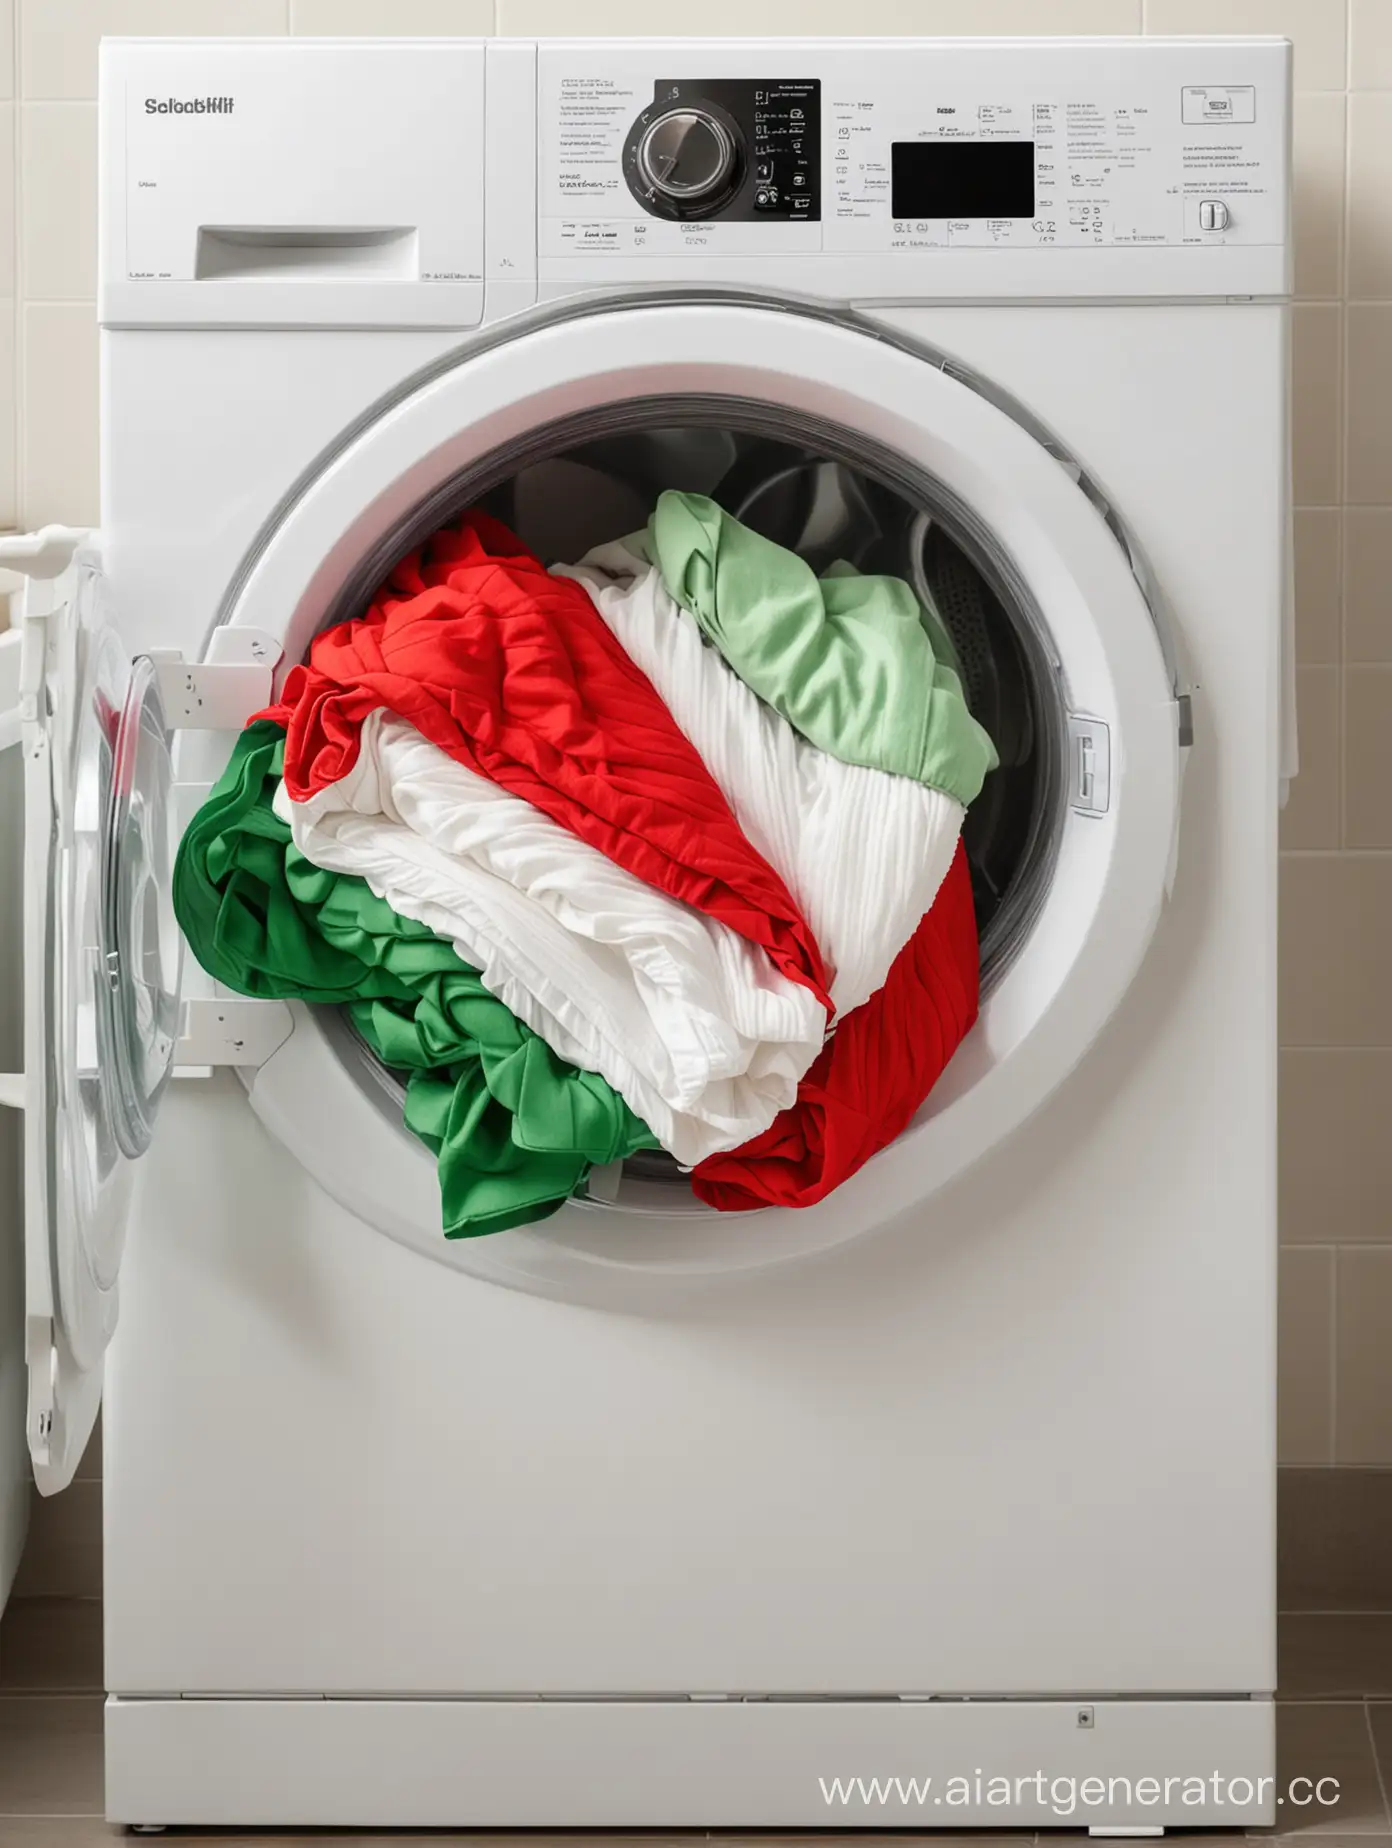 Folded-Laundry-in-Festive-Colors-on-Washing-Machine-in-Light-Bathroom